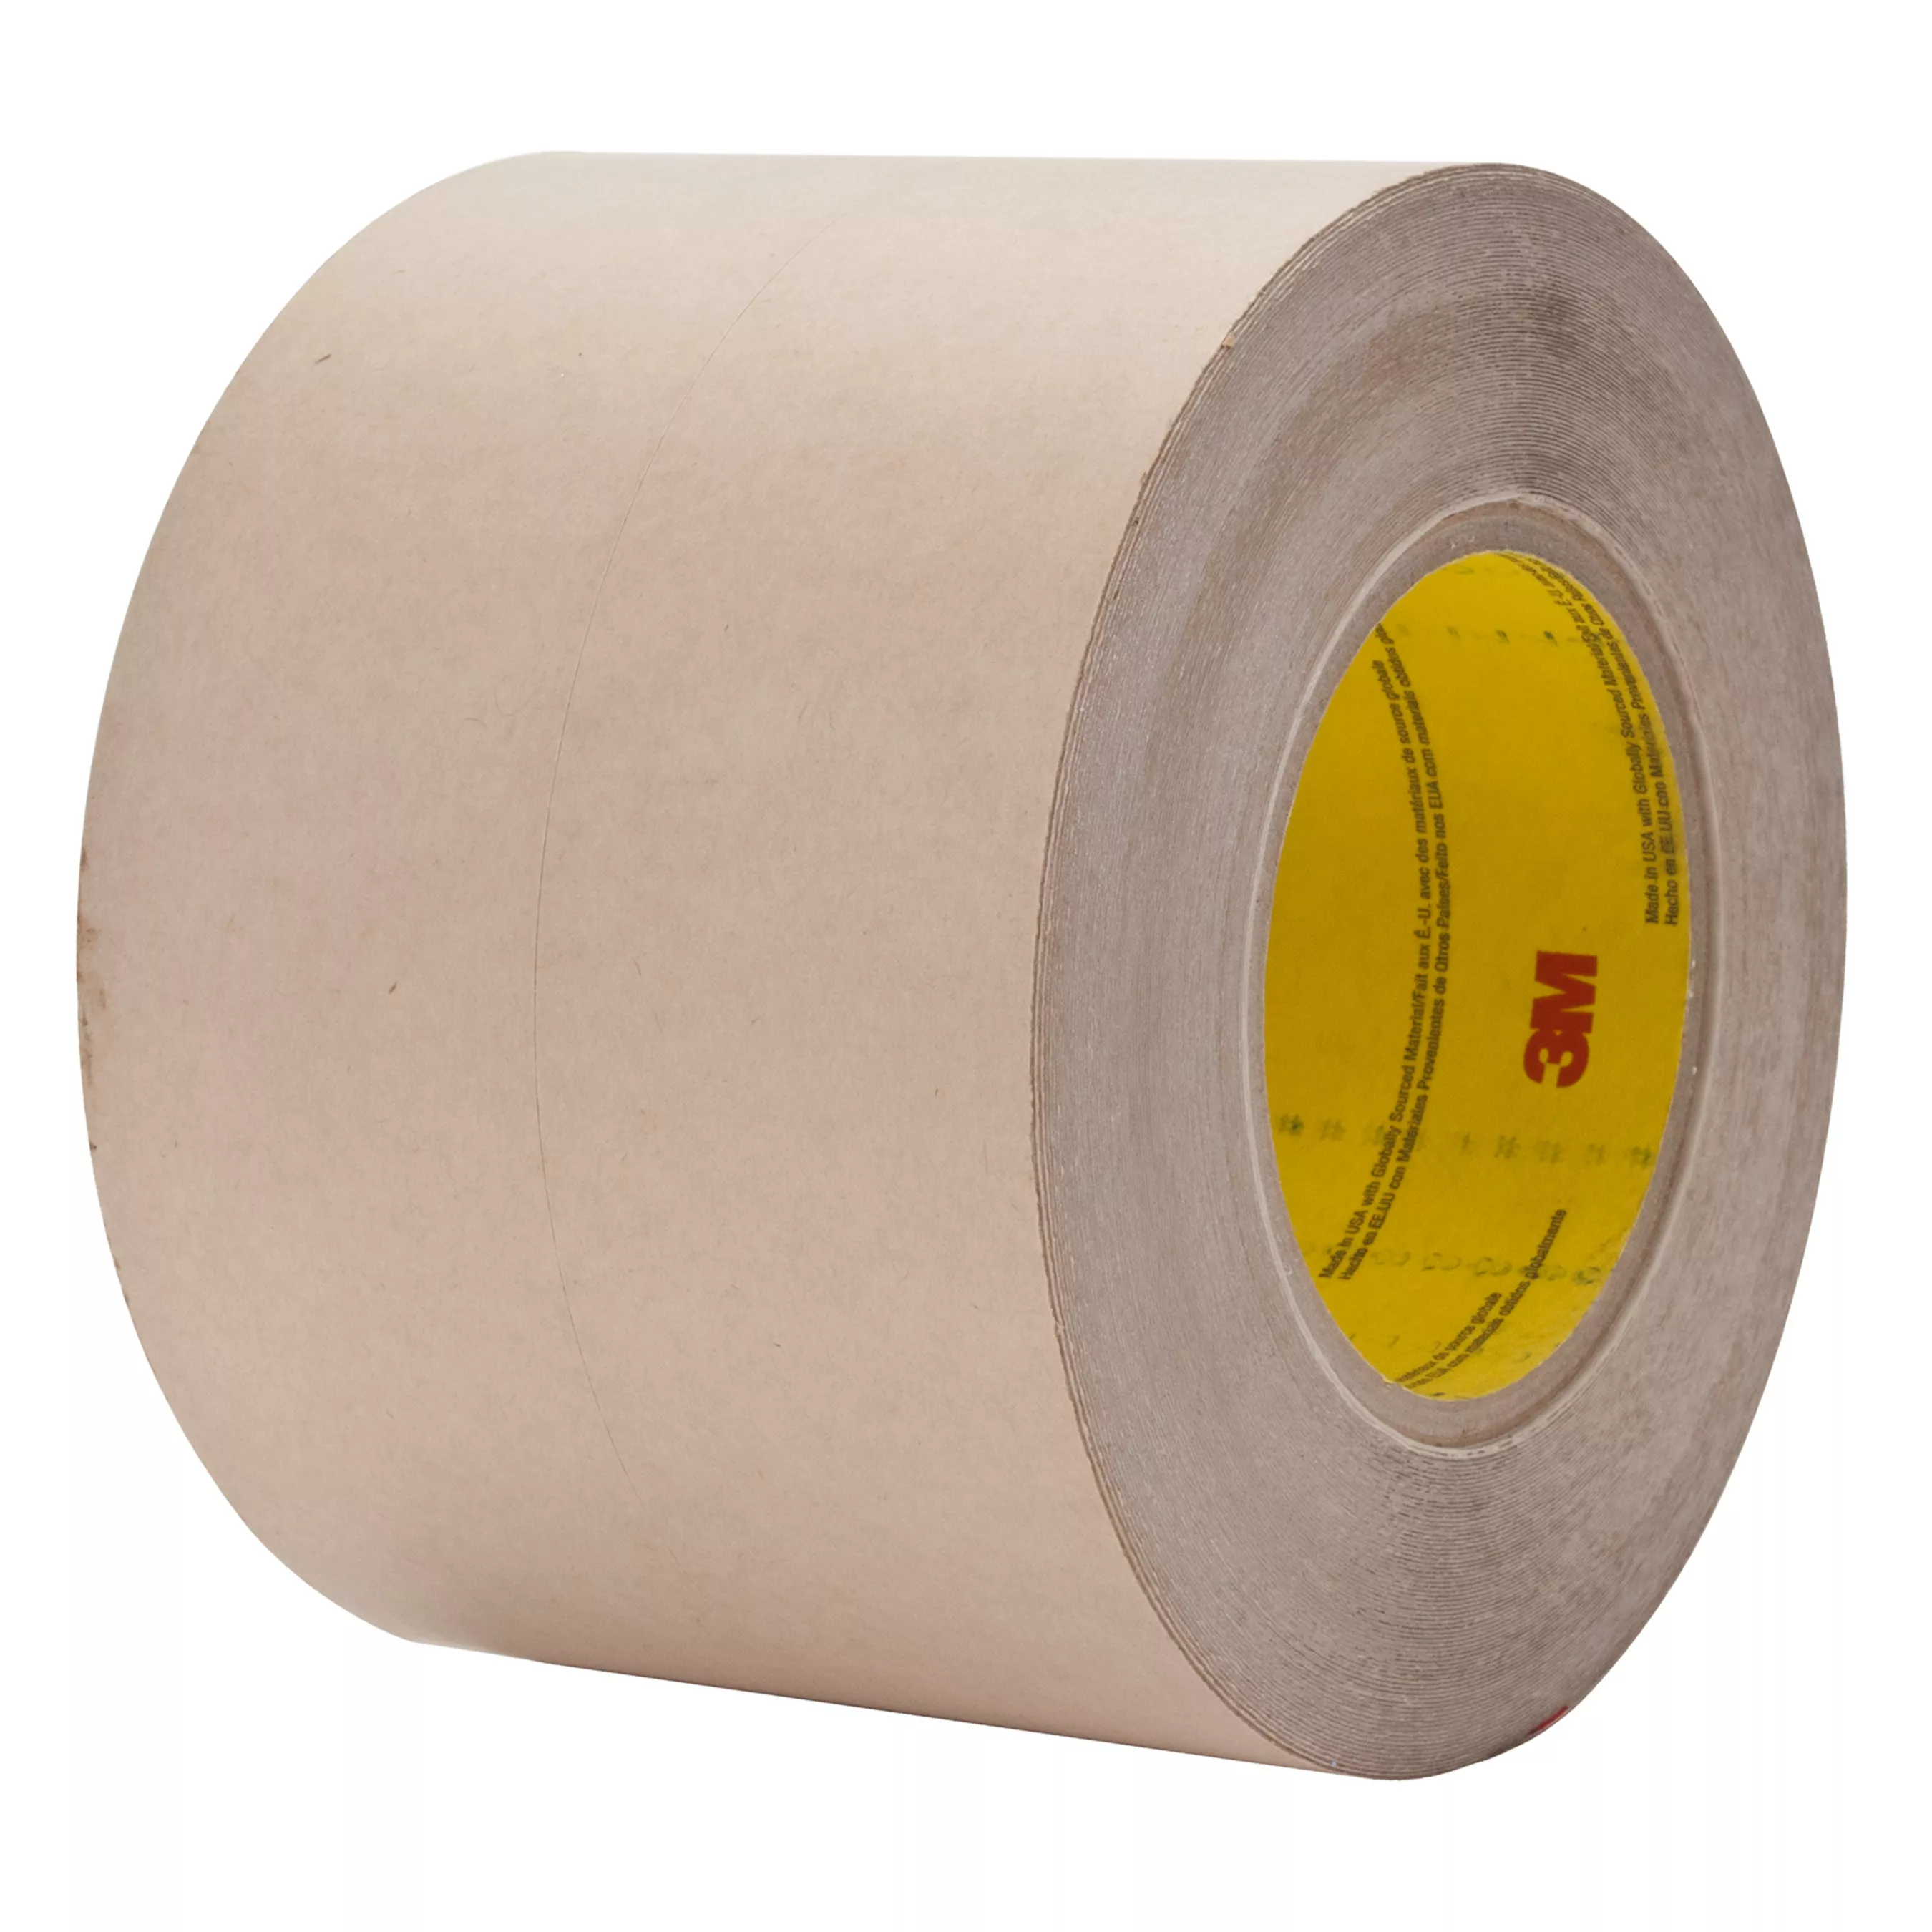 3M™ Sealing Tape 8777, Tan, 2 in x 75 ft, 24 Rolls/Case, Solid Liner